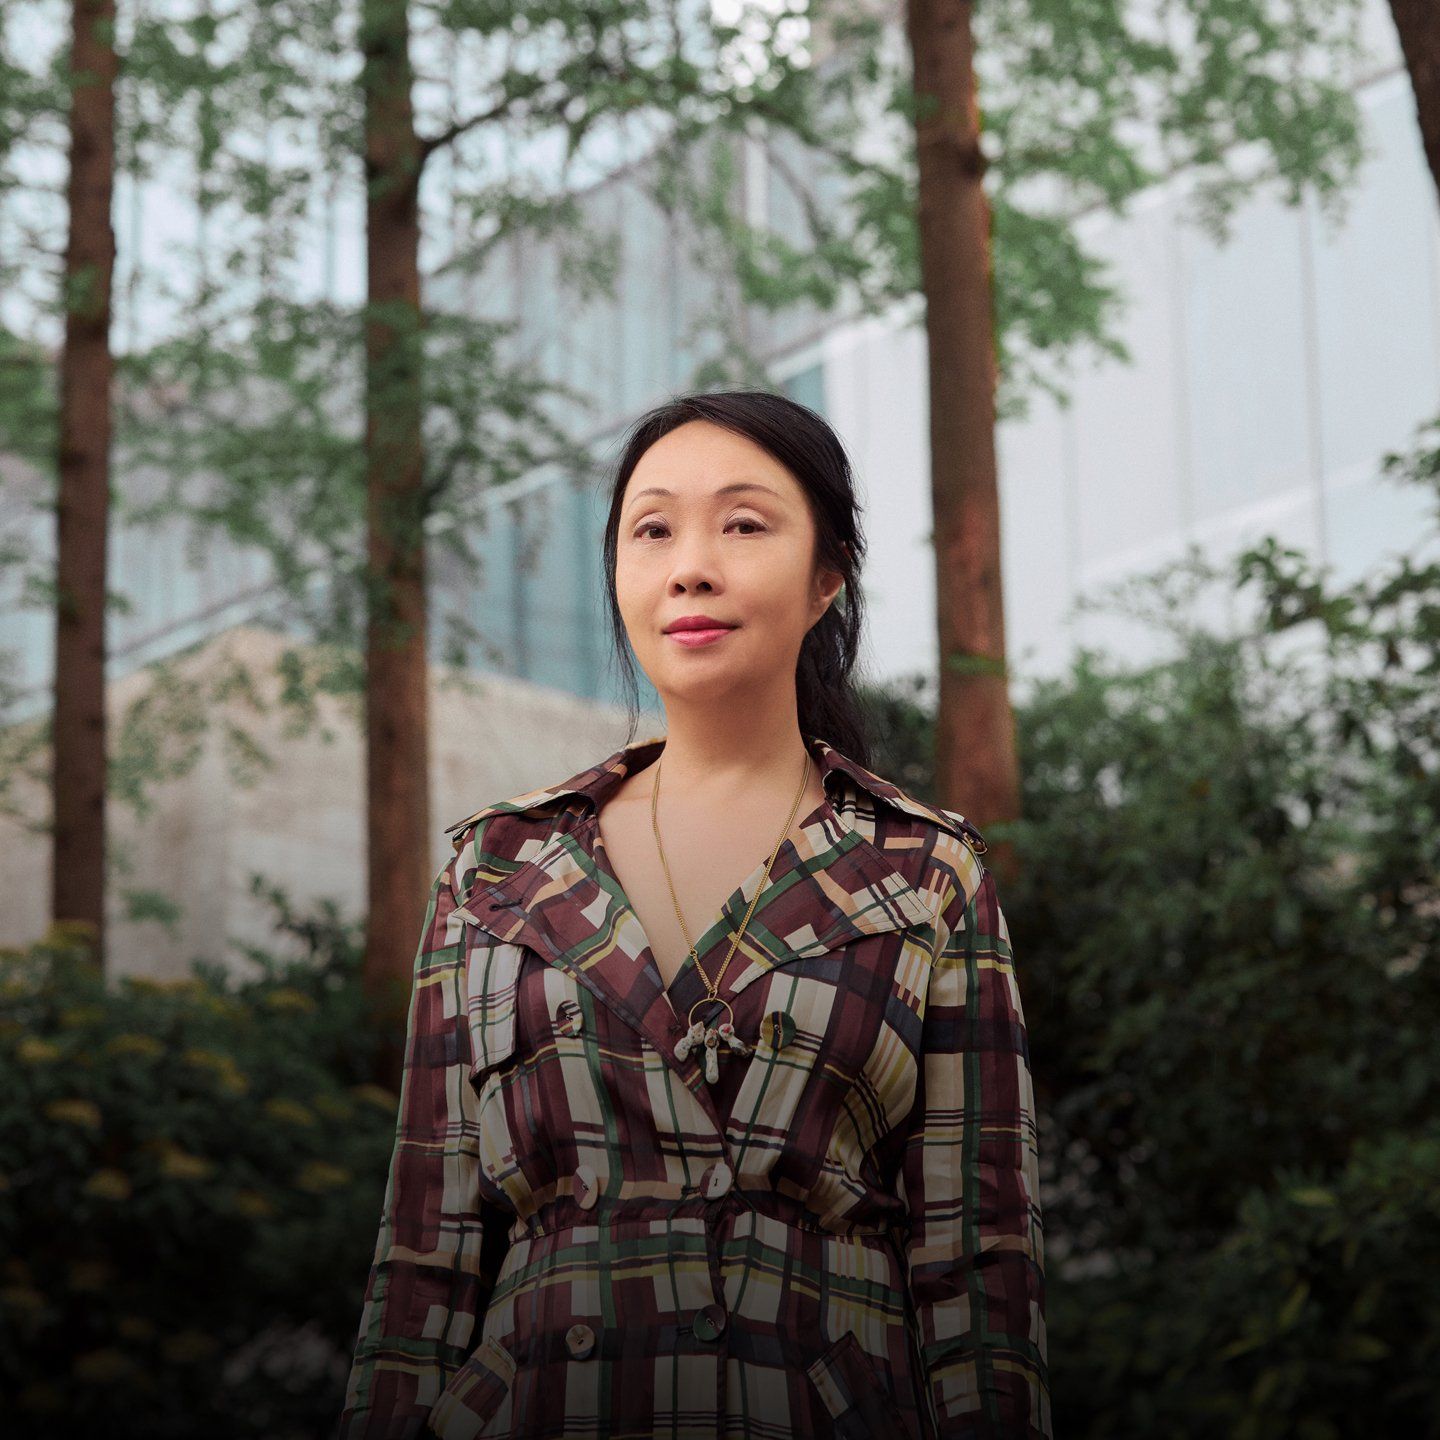 Shaway Yeh: Sustainability Consultant